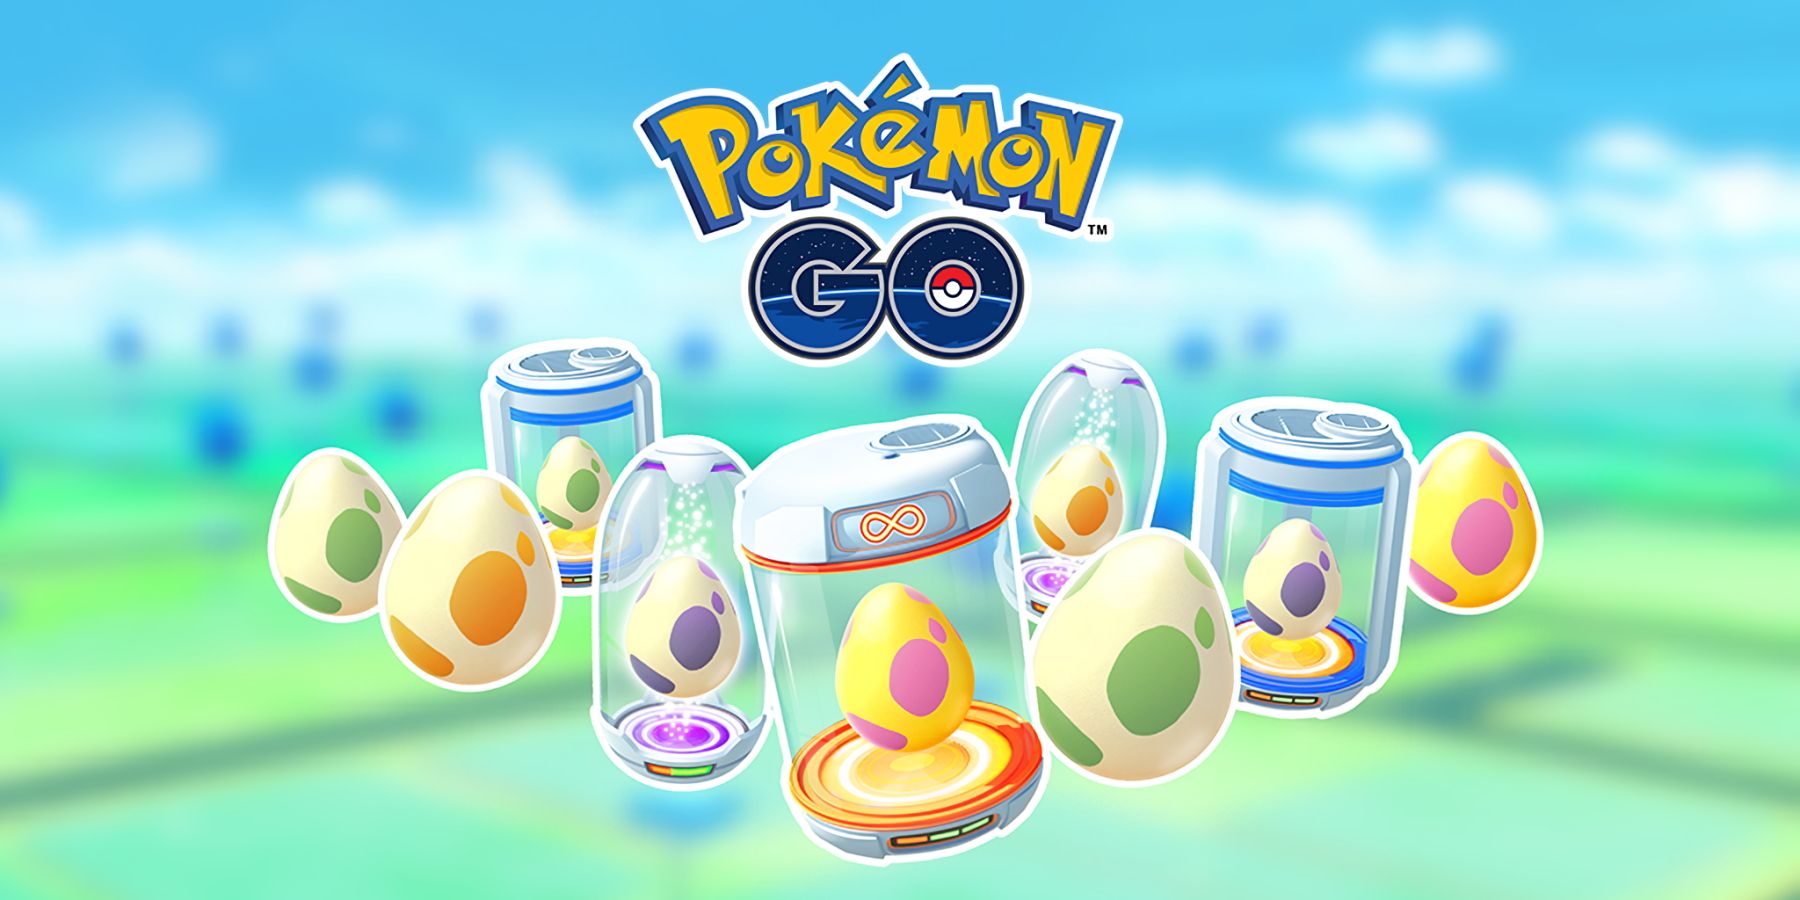 pokemon-go-egg-spedition-access-hatching-event-december